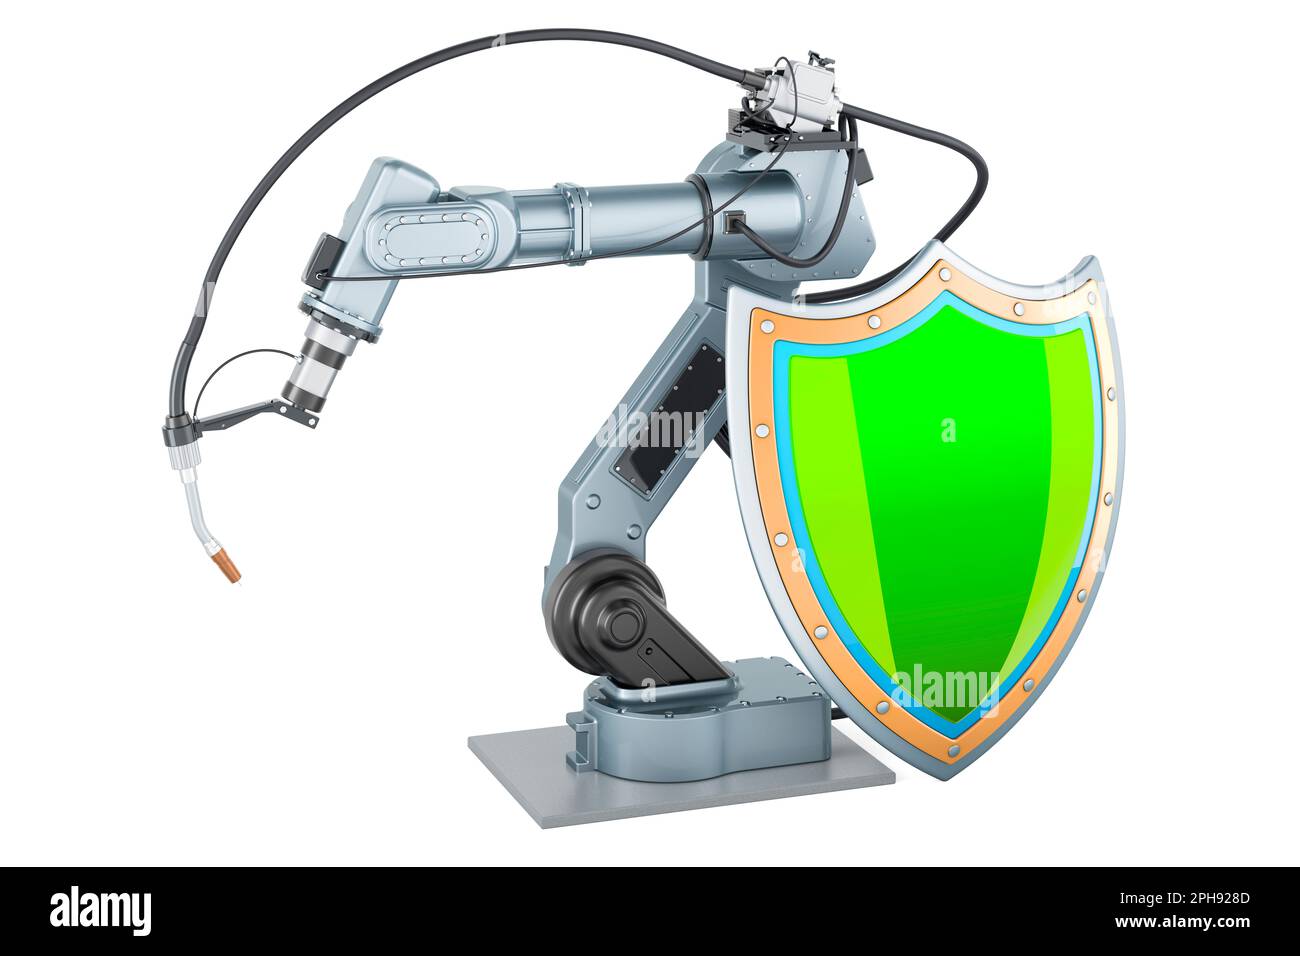 Robot welding with shield. 3D rendering isolated on white background Stock Photo